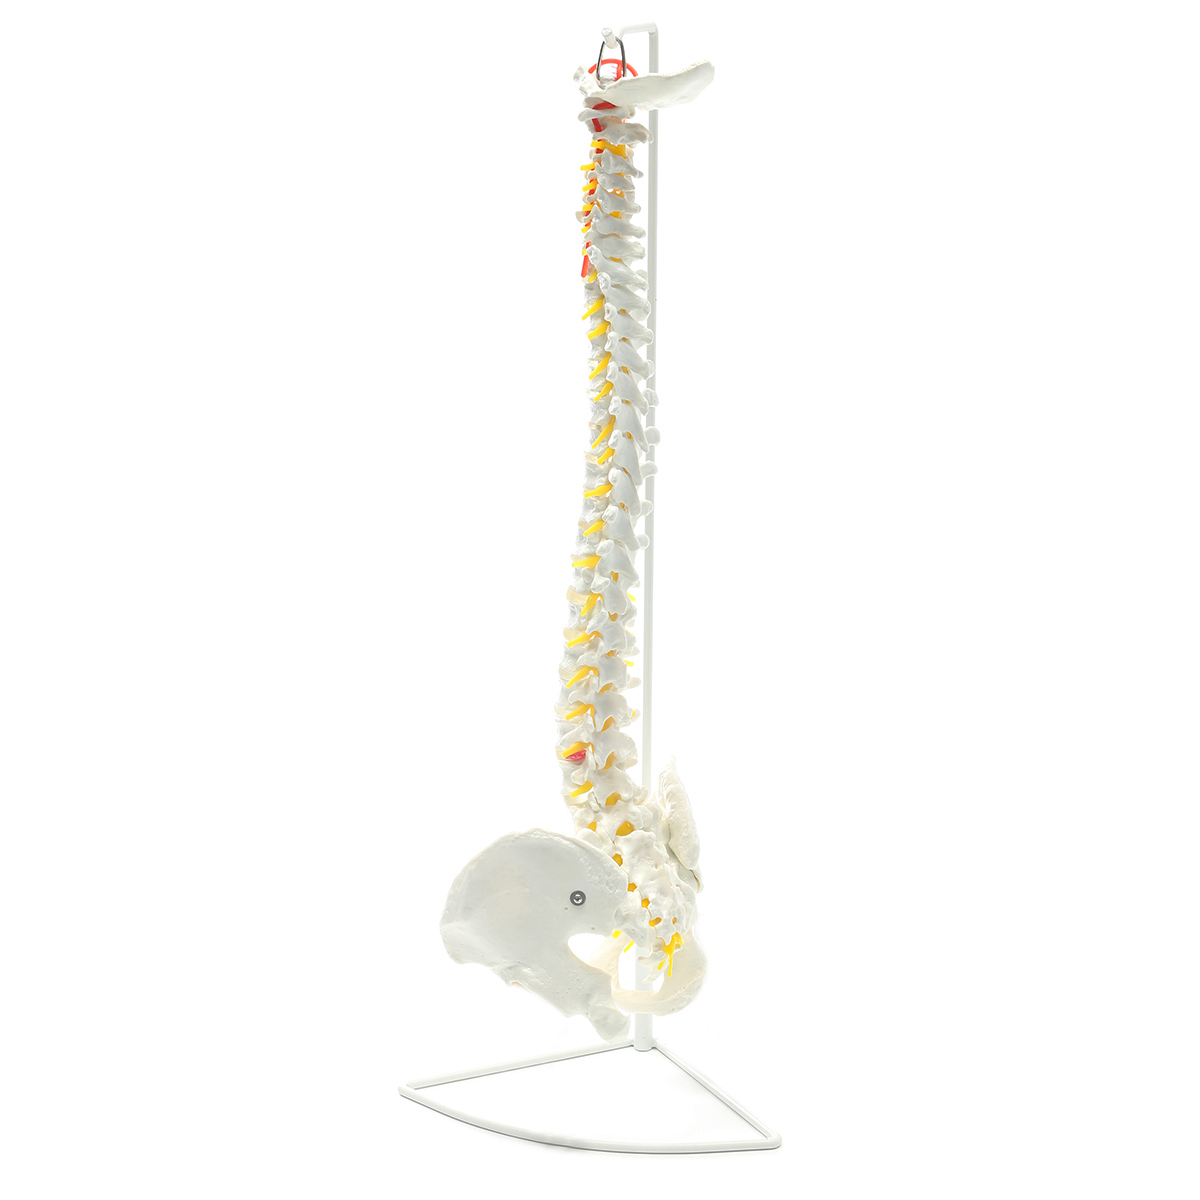 73cm Life Size Flexible Chiropractic Human Spine Anatomical Anatomy Model With Stand School Medical Science Educational Model